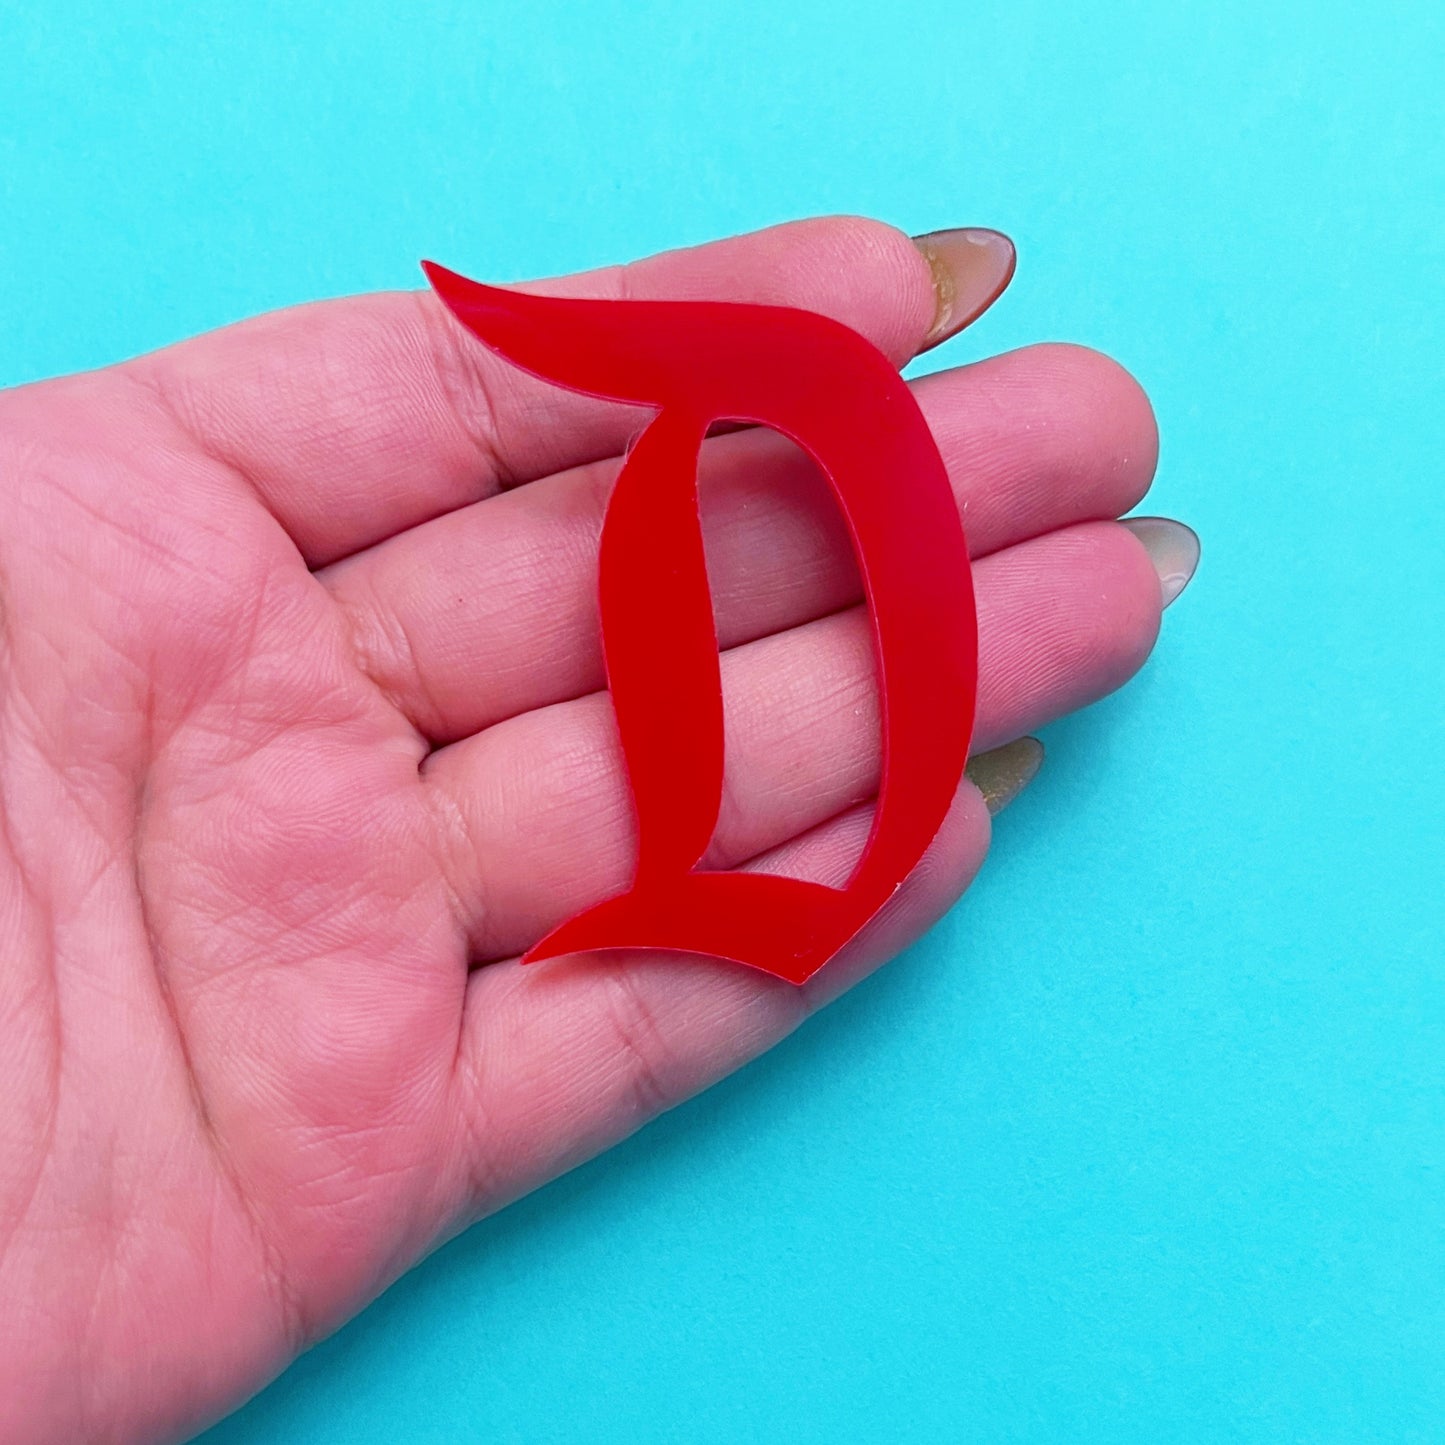 Red Retro “D” Inspired Acrylic Brooch Pin